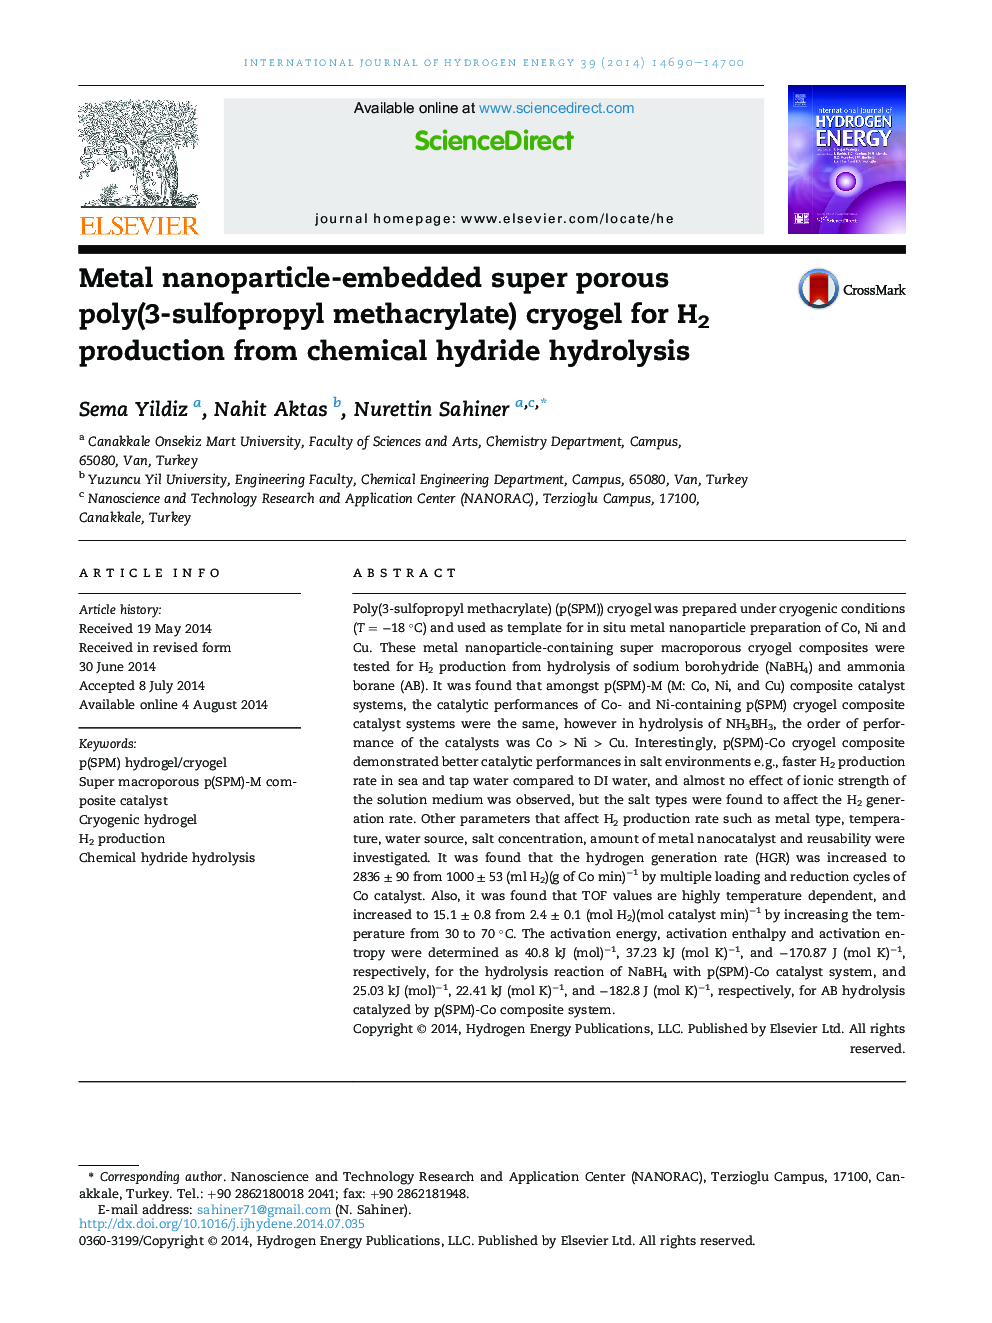 Metal nanoparticle-embedded super porous poly(3-sulfopropyl methacrylate) cryogel for H2 production from chemical hydride hydrolysis